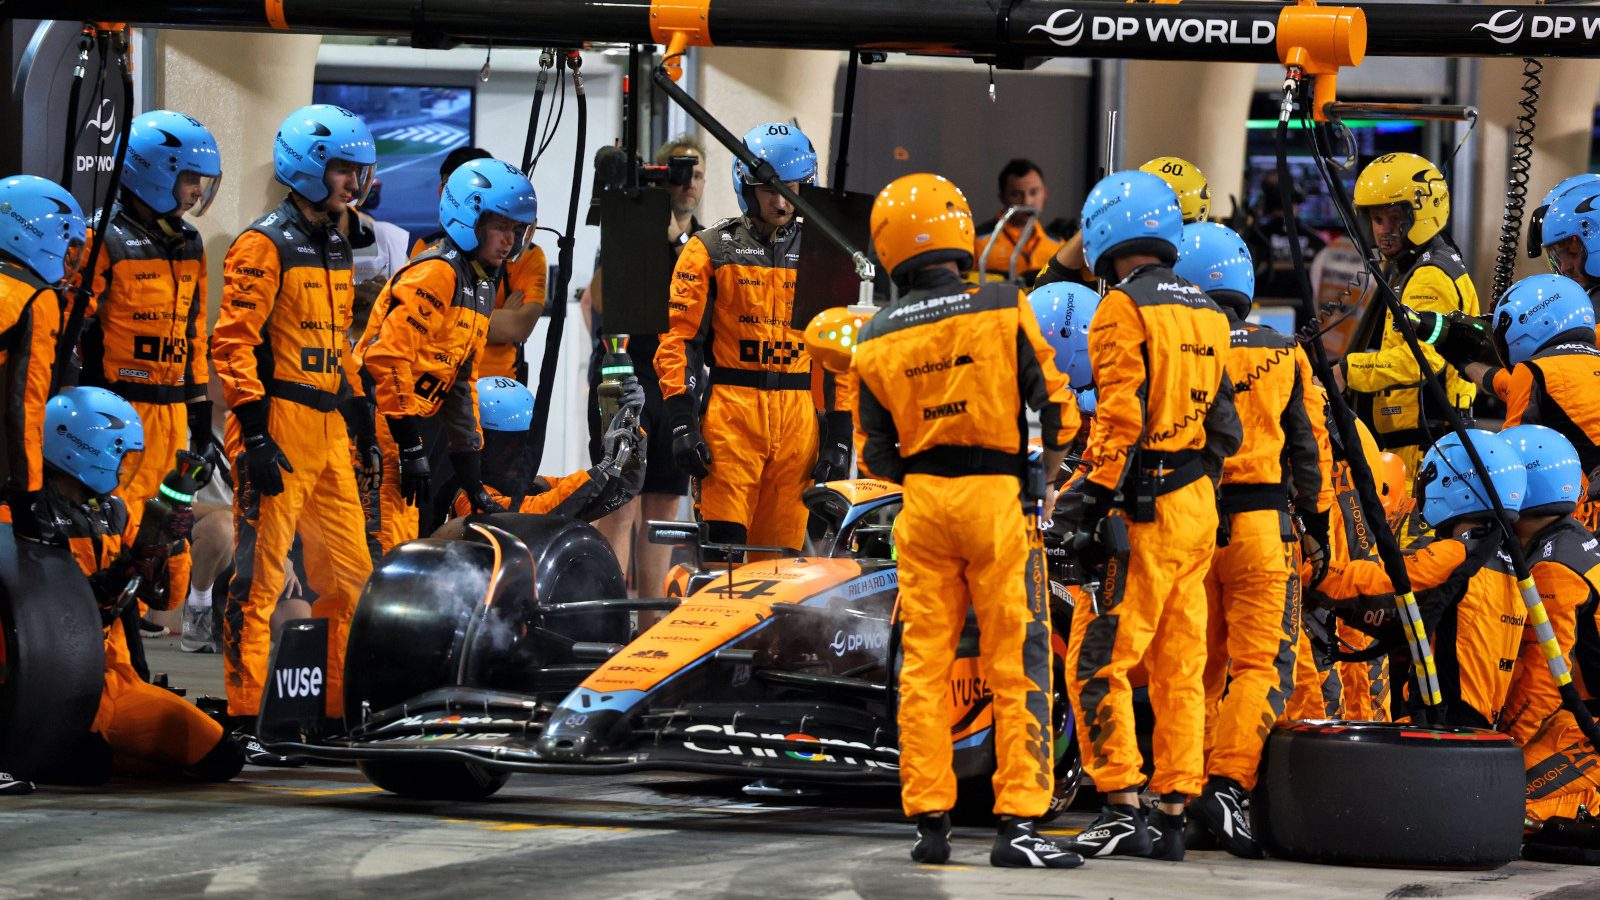 Lando Norris with another pit stop in the grand prix. Bahrain March 2023